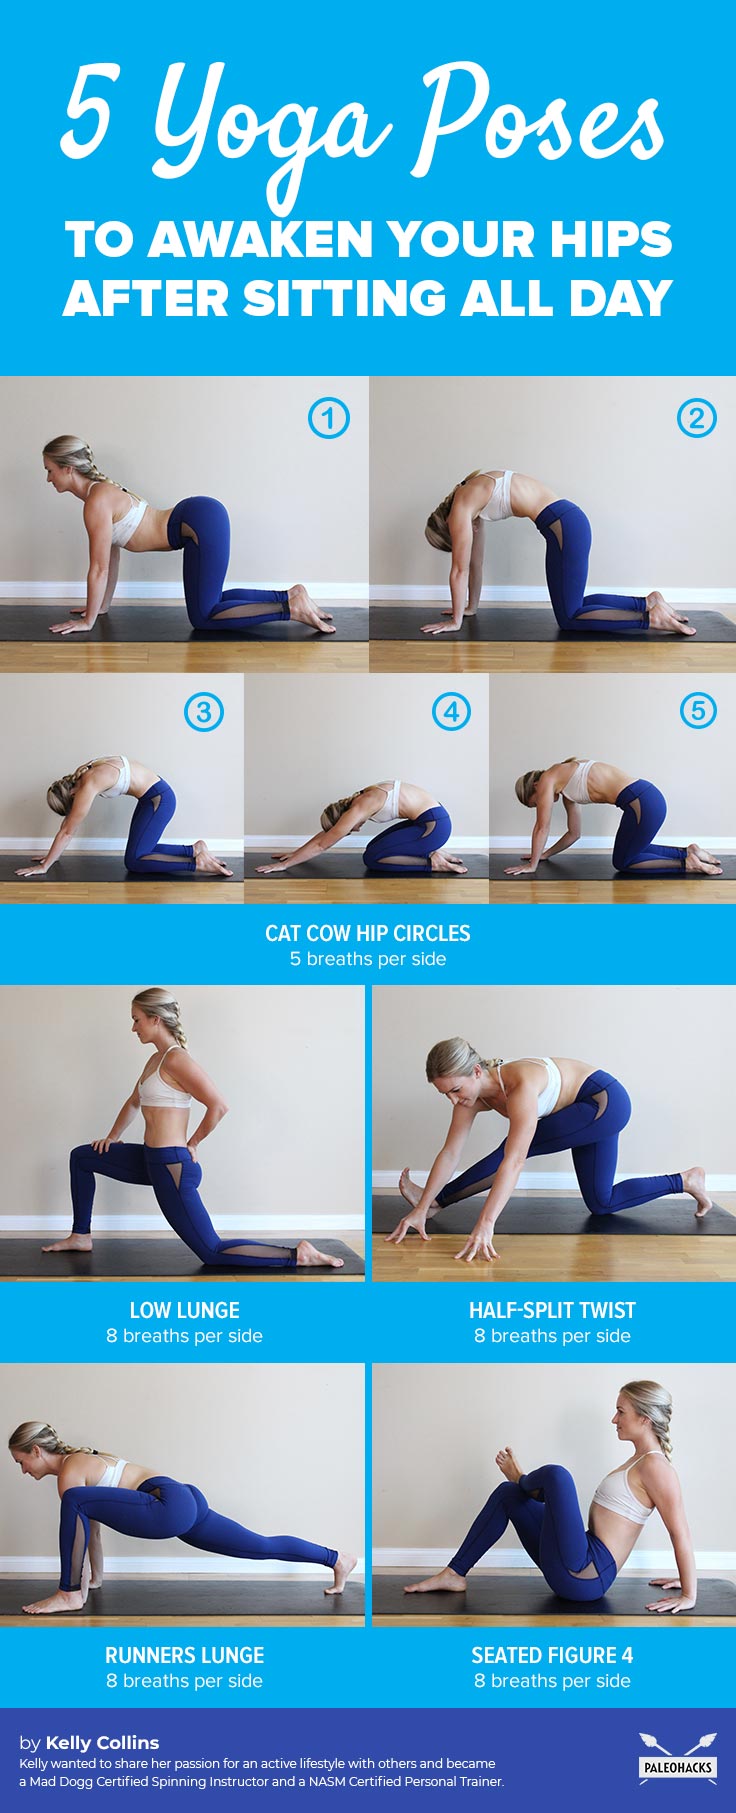 Use these five yoga poses to awaken your hips after a long day of sitting at the office. This routine can be done once or twice per day. All you need is an exercise or yoga mat.